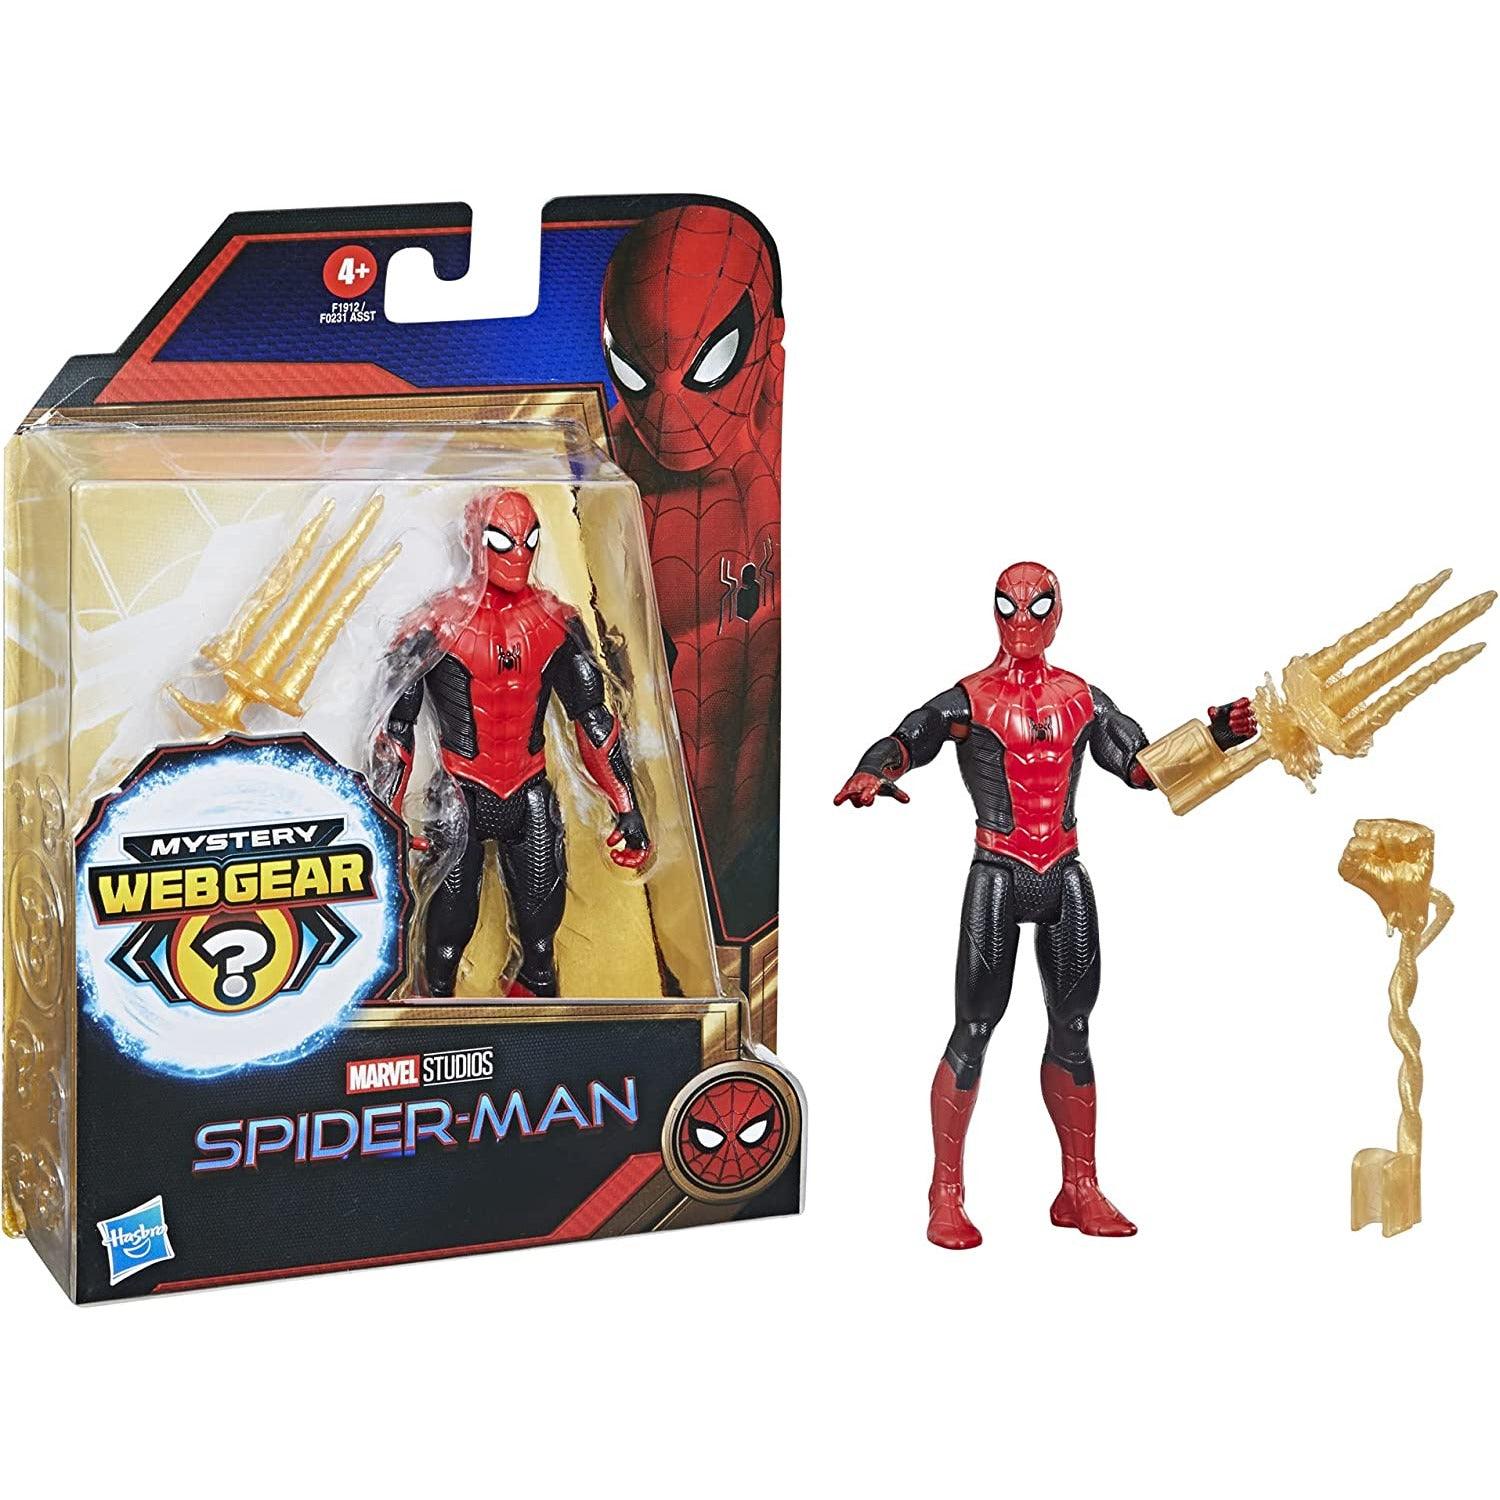 Hasbro Marvel Studios Mystery Web Gear Upgraded Black and Red Suit Action Figure - 6-Inch - BumbleToys - 5-7 Years, Action Figures, Avengers, Boys, Eagle Plus